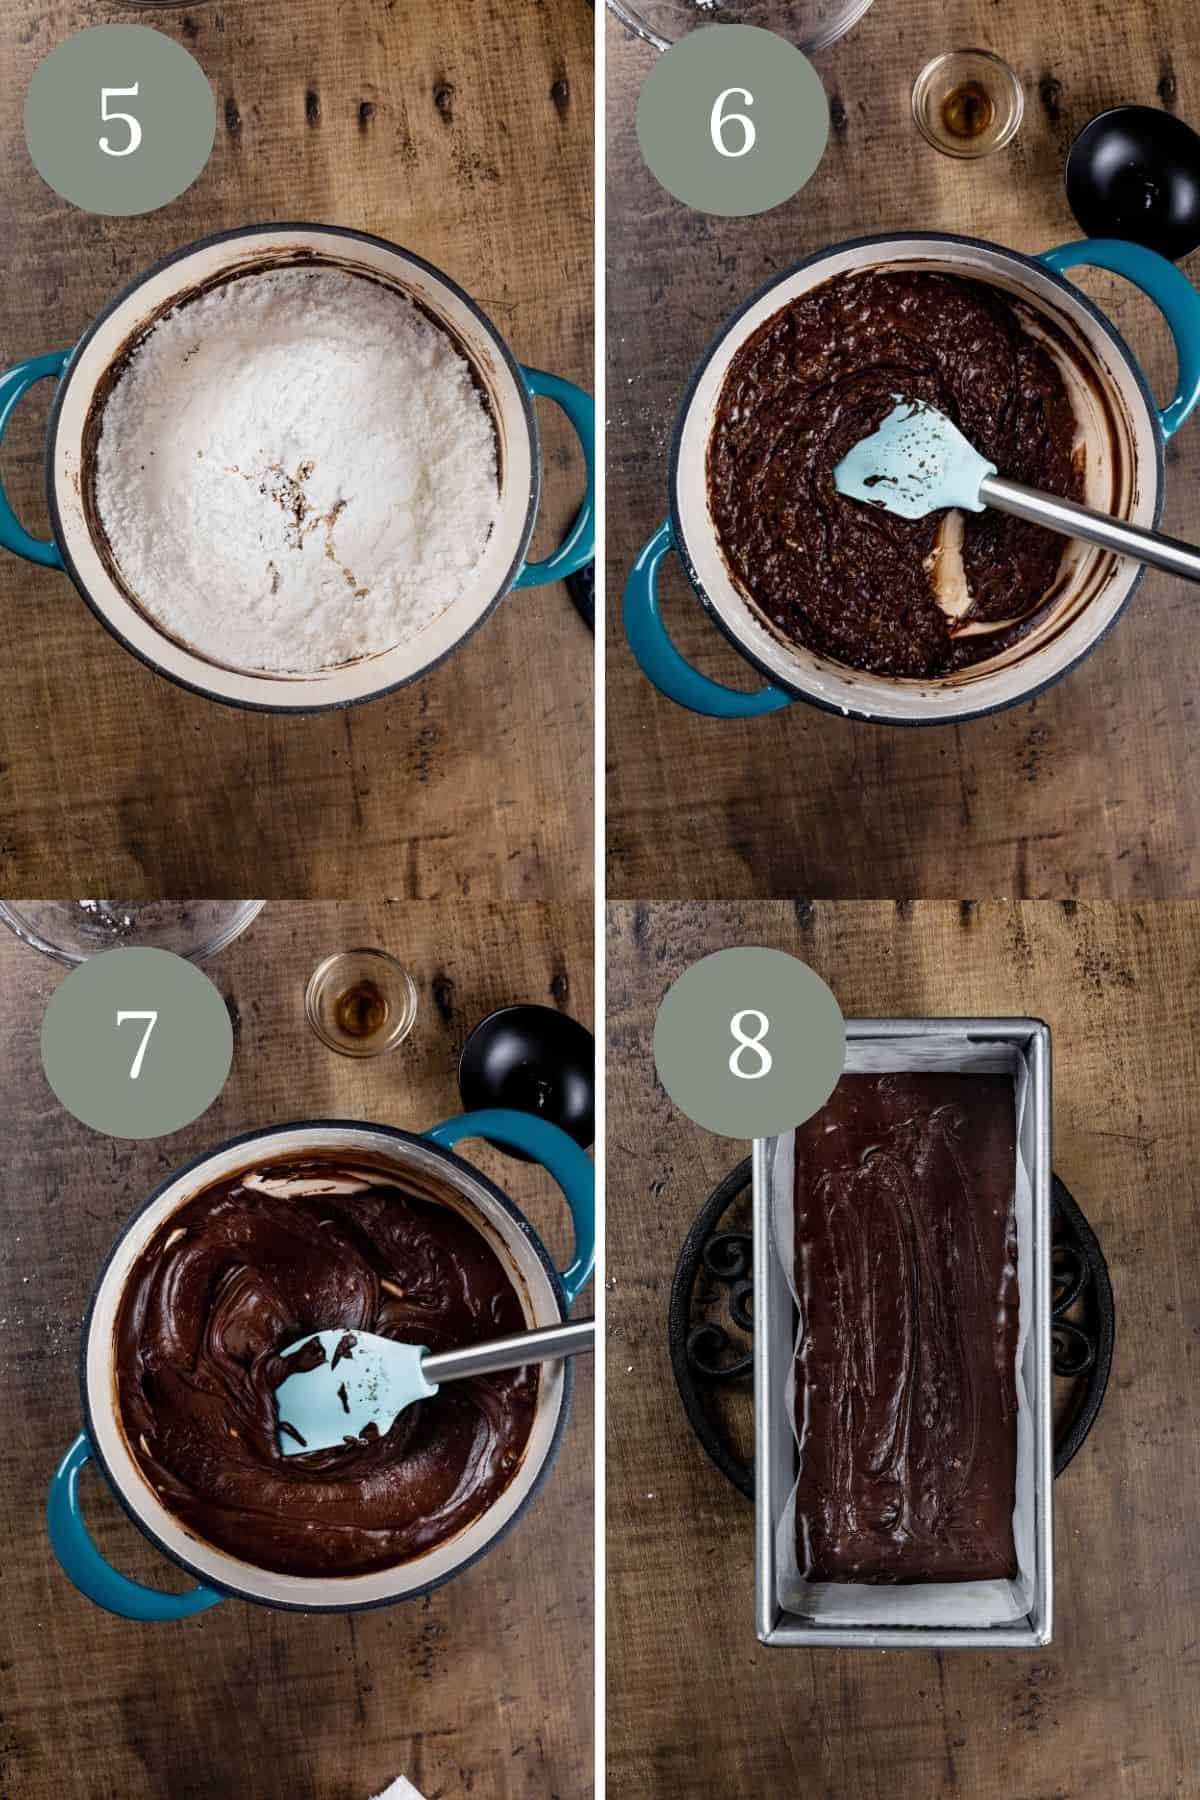 steps 5 through 8 of making fudge in a collage. it shows mixing the sugar into the fudge and mixing it til smooth. last it shows the fudge in the prepared pan.